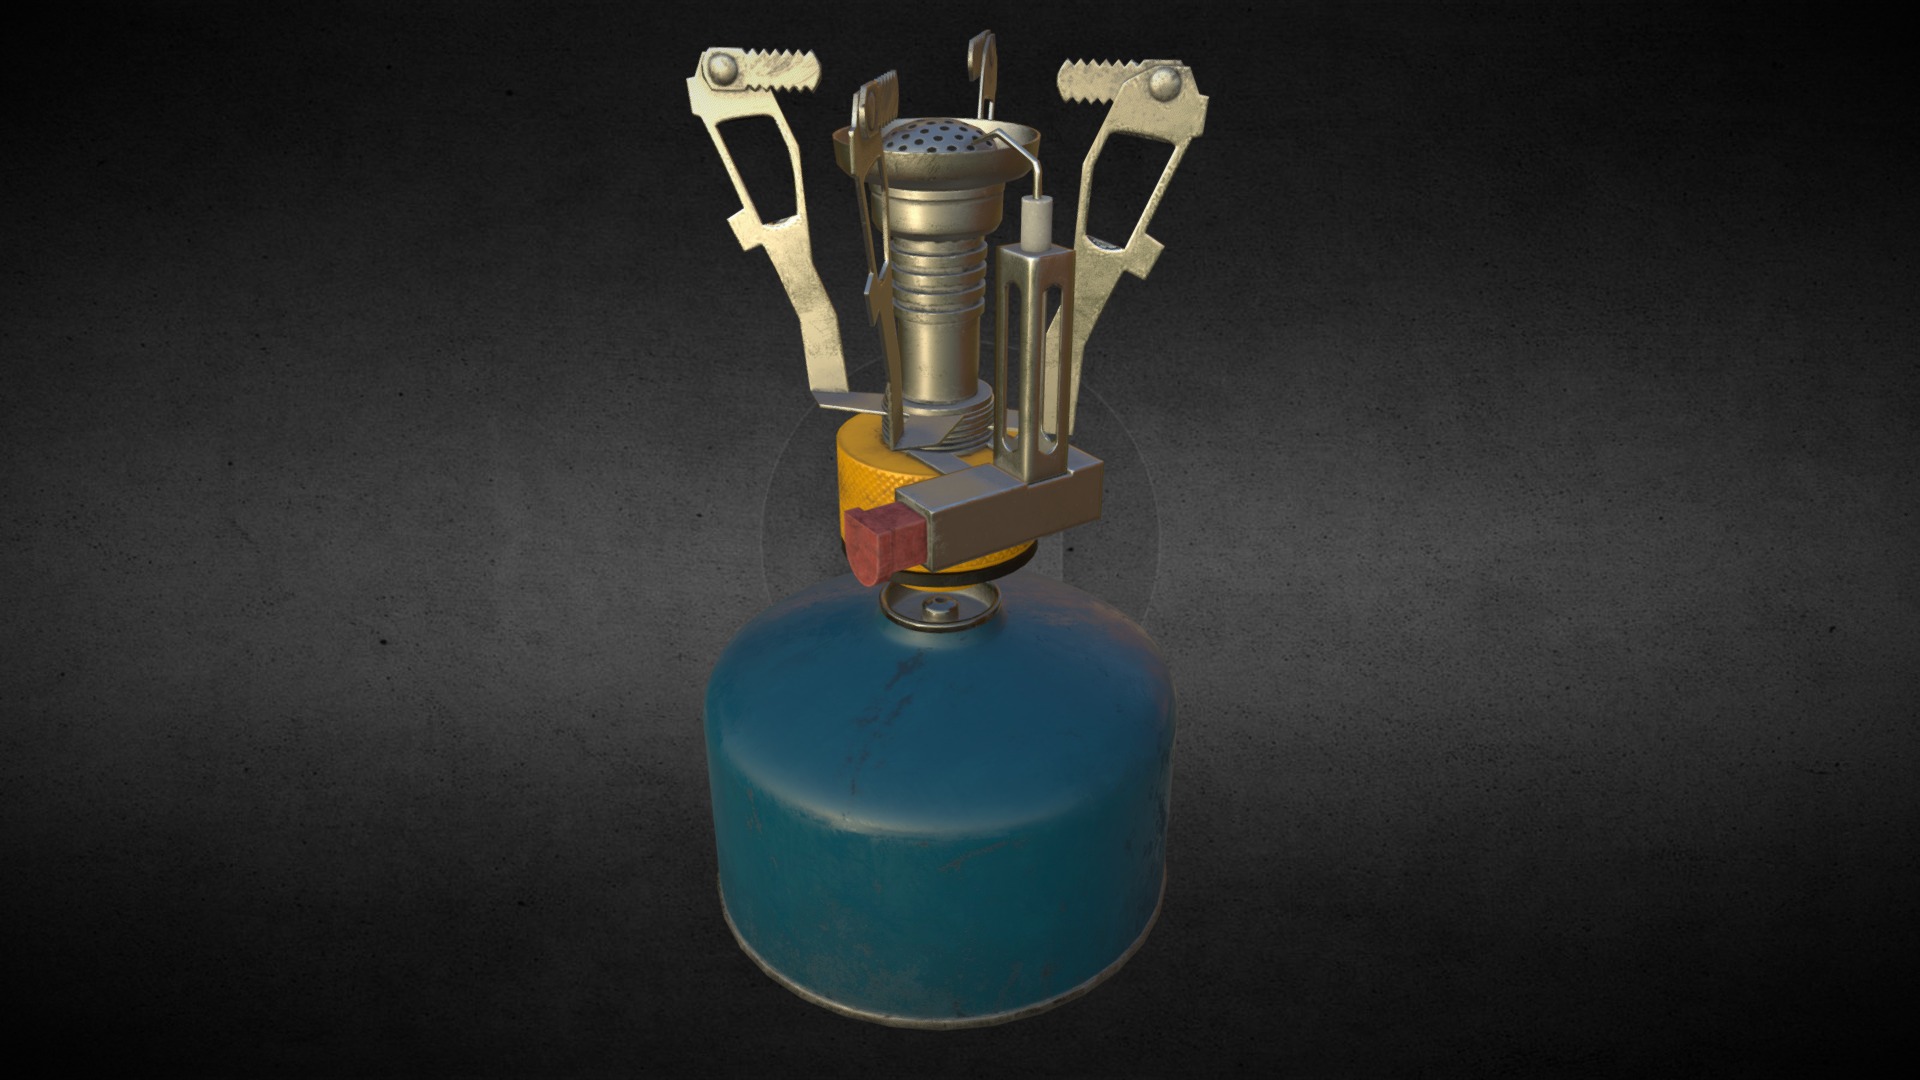 3D model Realistic Gas Stove - This is a 3D model of the Realistic Gas Stove. The 3D model is about a small metal object.